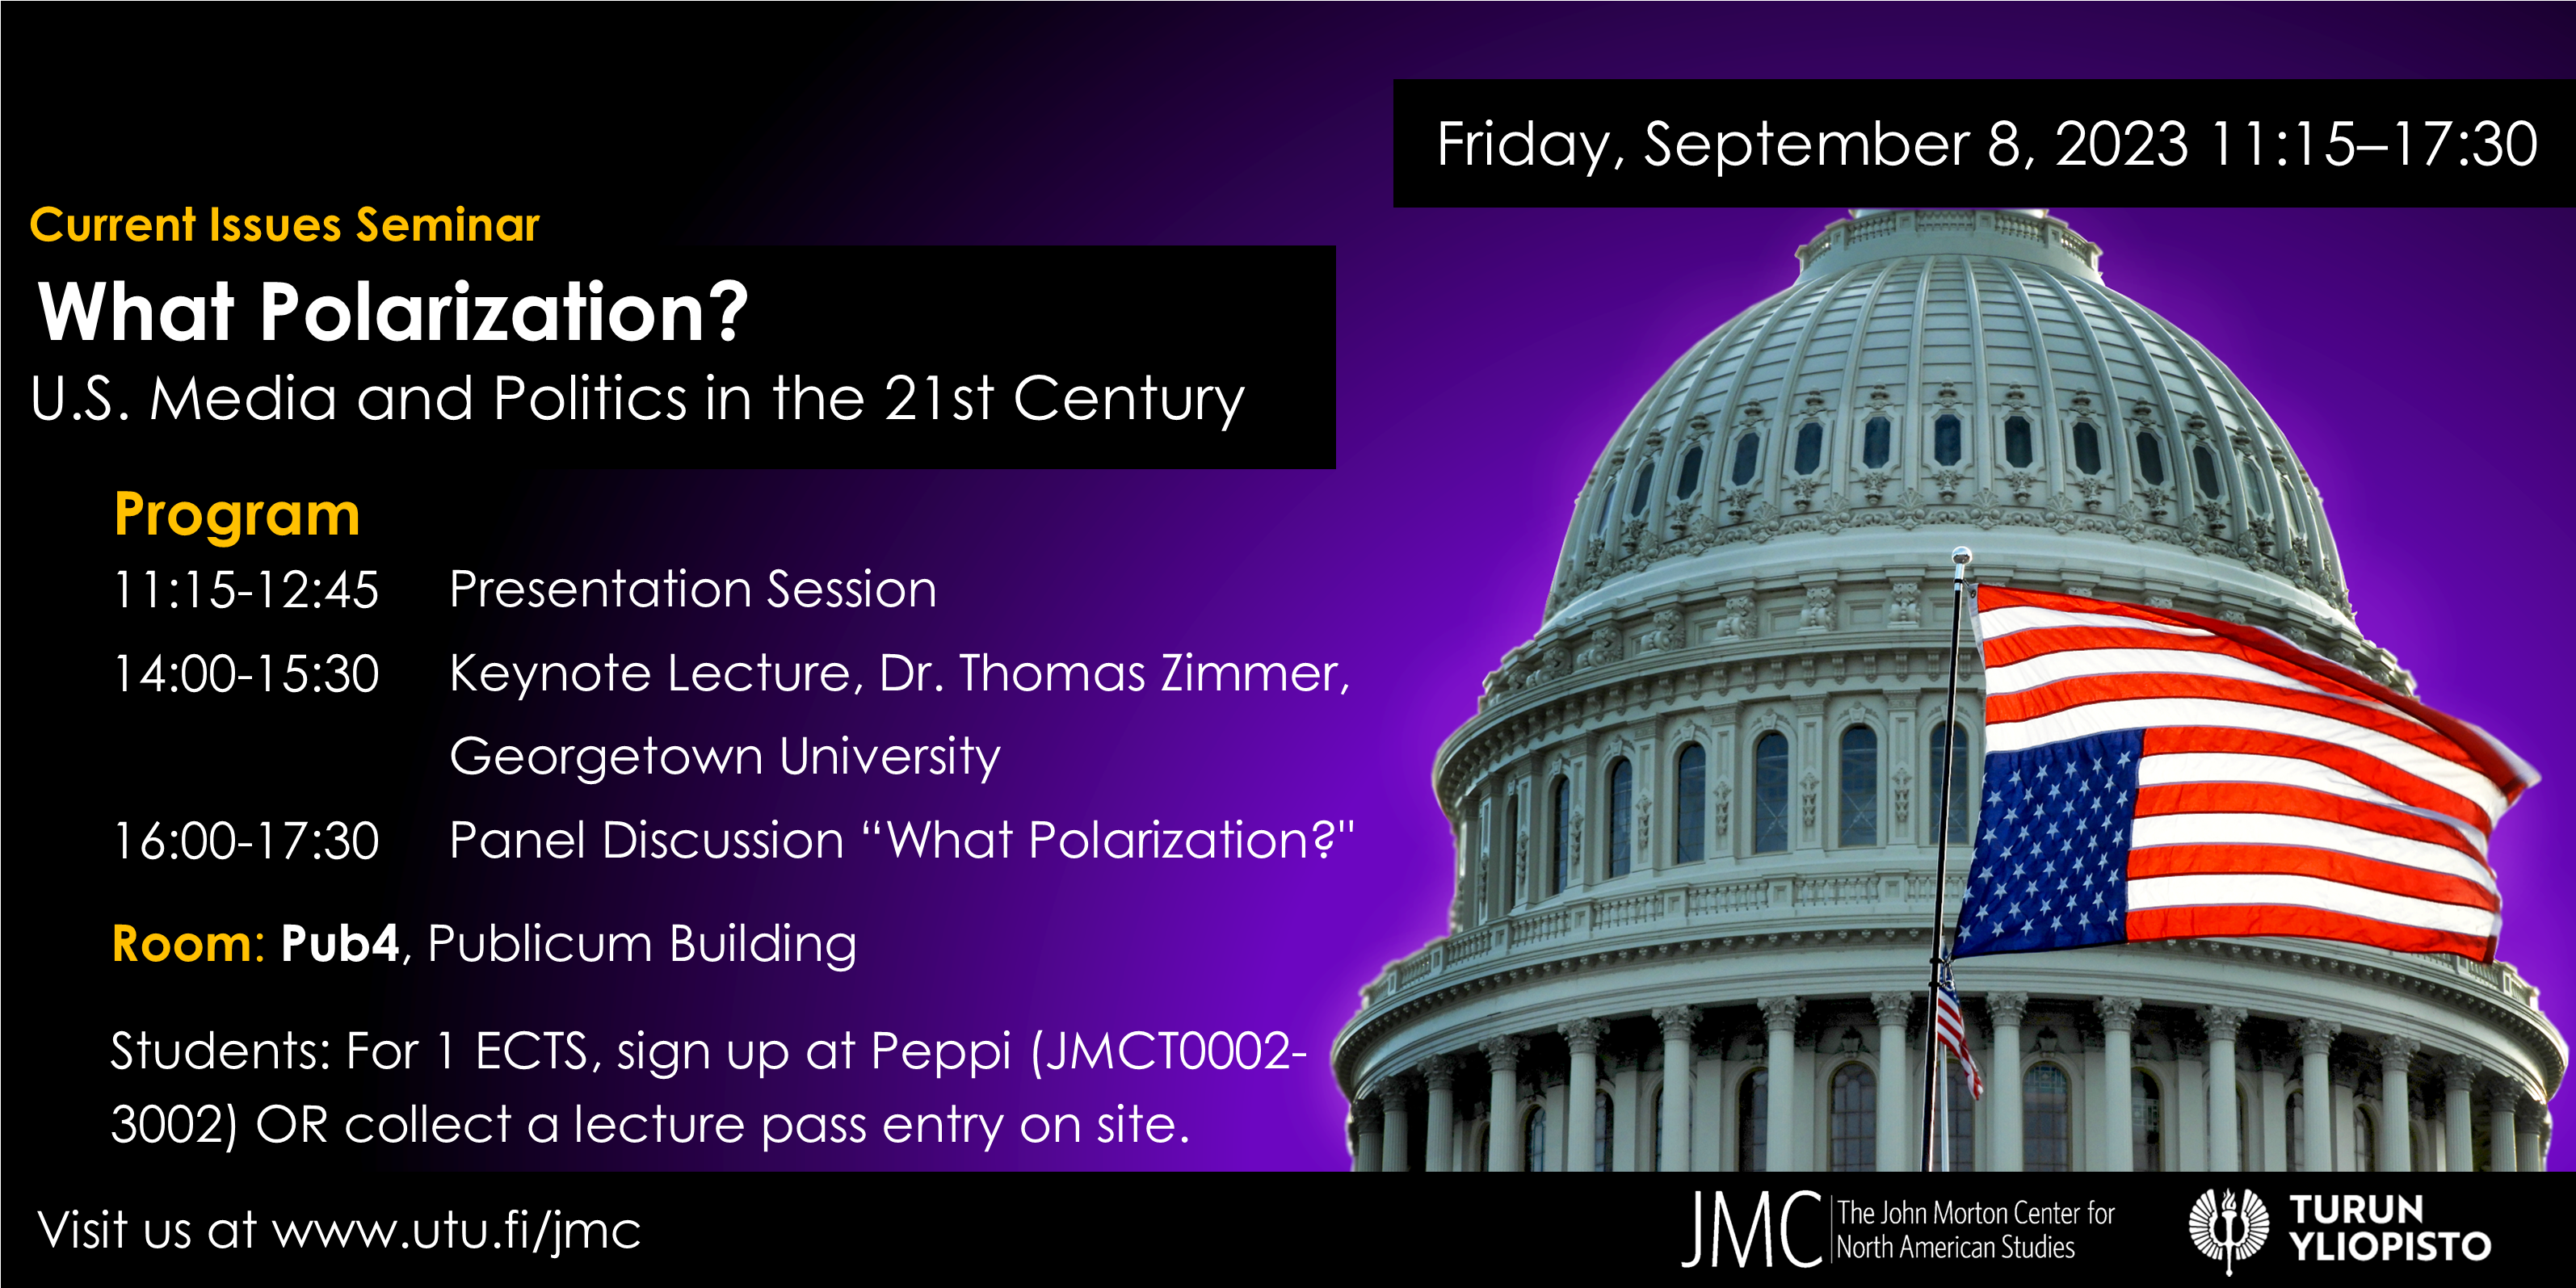 The schedule for a current issues seminar: What polarization?